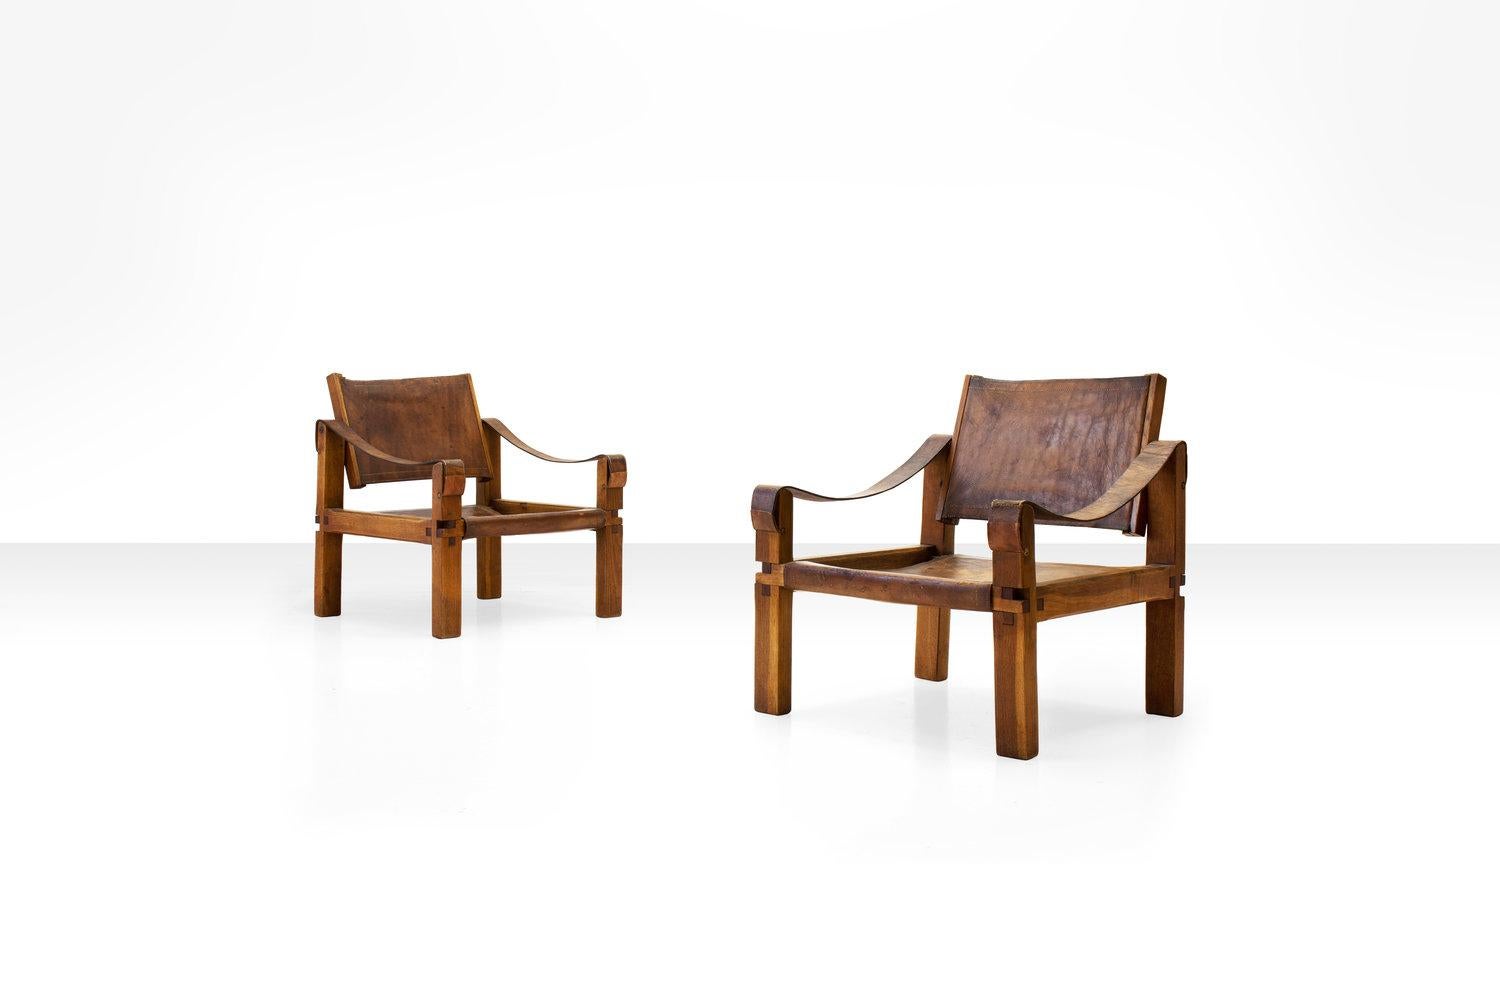 Pair of Pierre Chapo S10 Easy Chairs in Cognac Leather and Oak, France 1960s.  

Designed in the 1960s and produced in solid elm and cognac leather, the s10 chair is one of the most elemental works in Chapo's oeuvre. The chair combines a complex